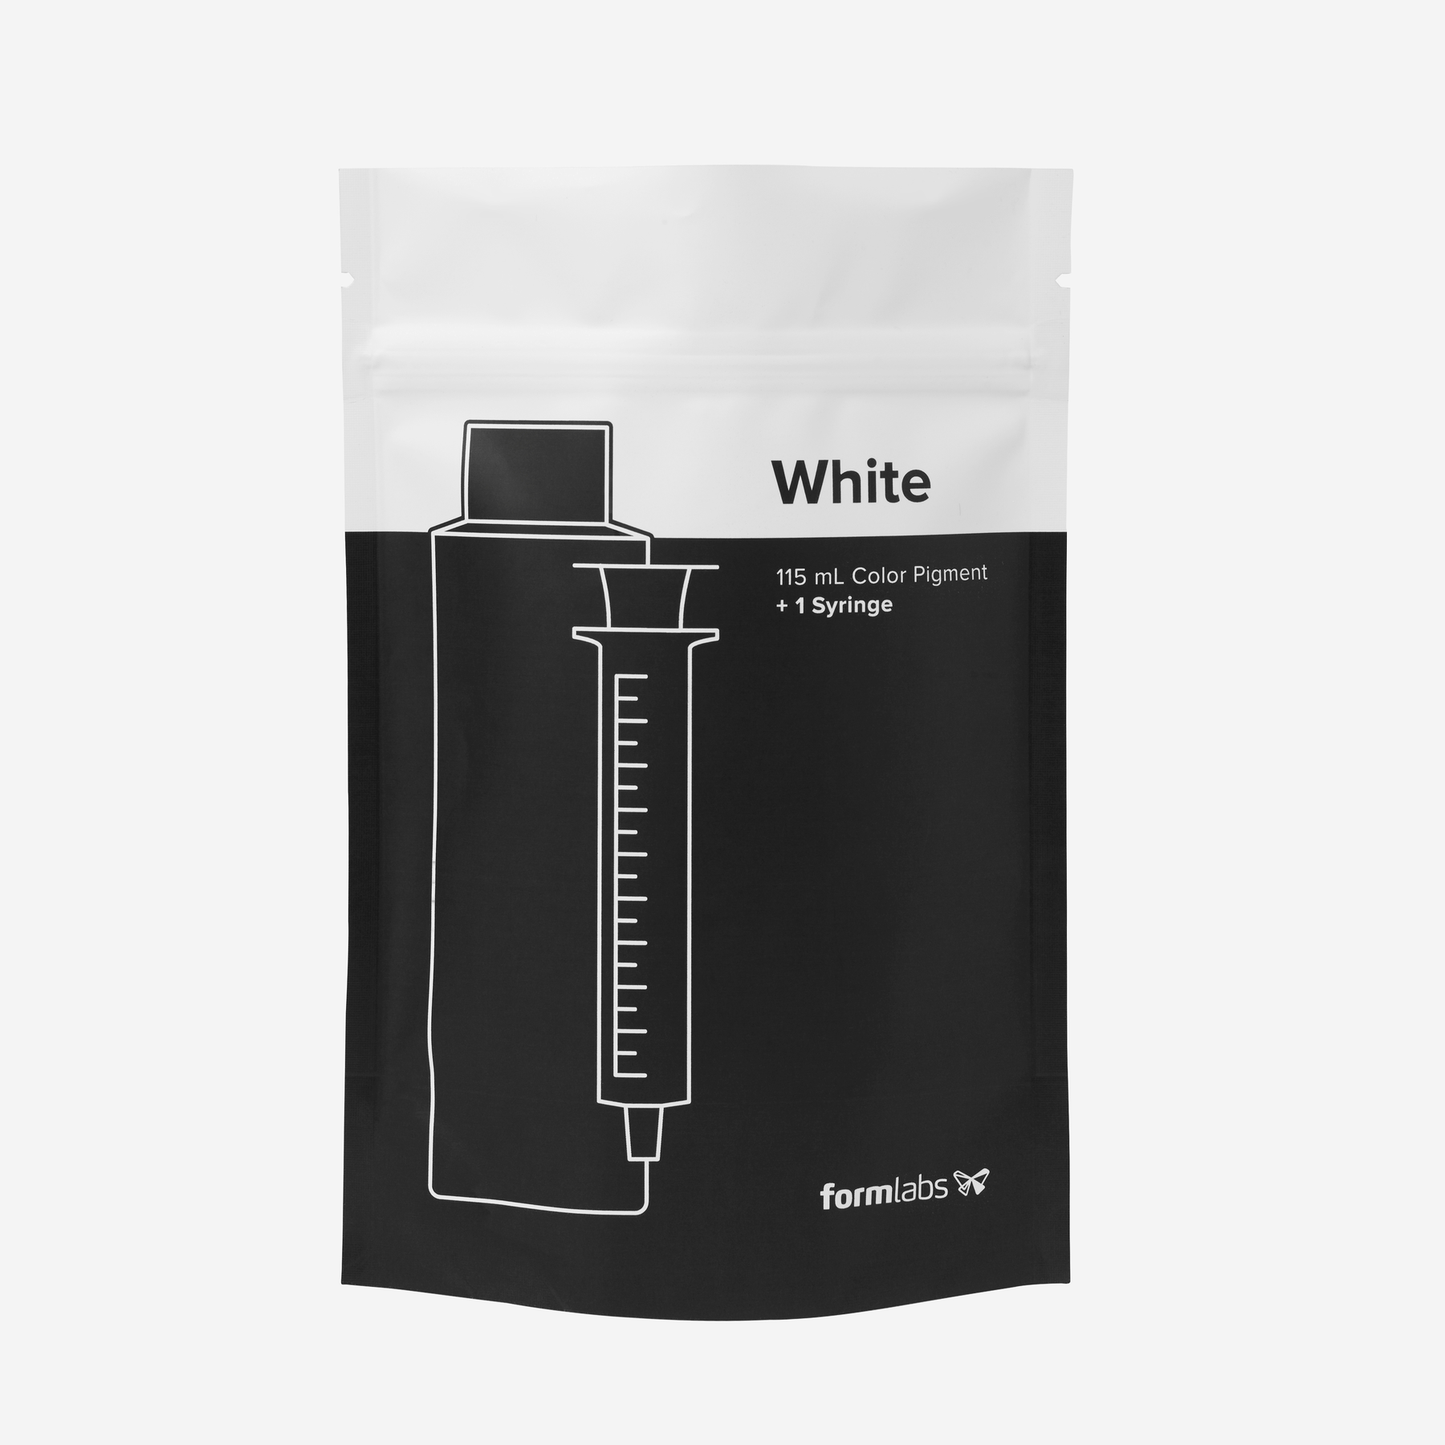 white syringe. Shop additive manufacturing printers, resins and accessories | eacadditive.com.